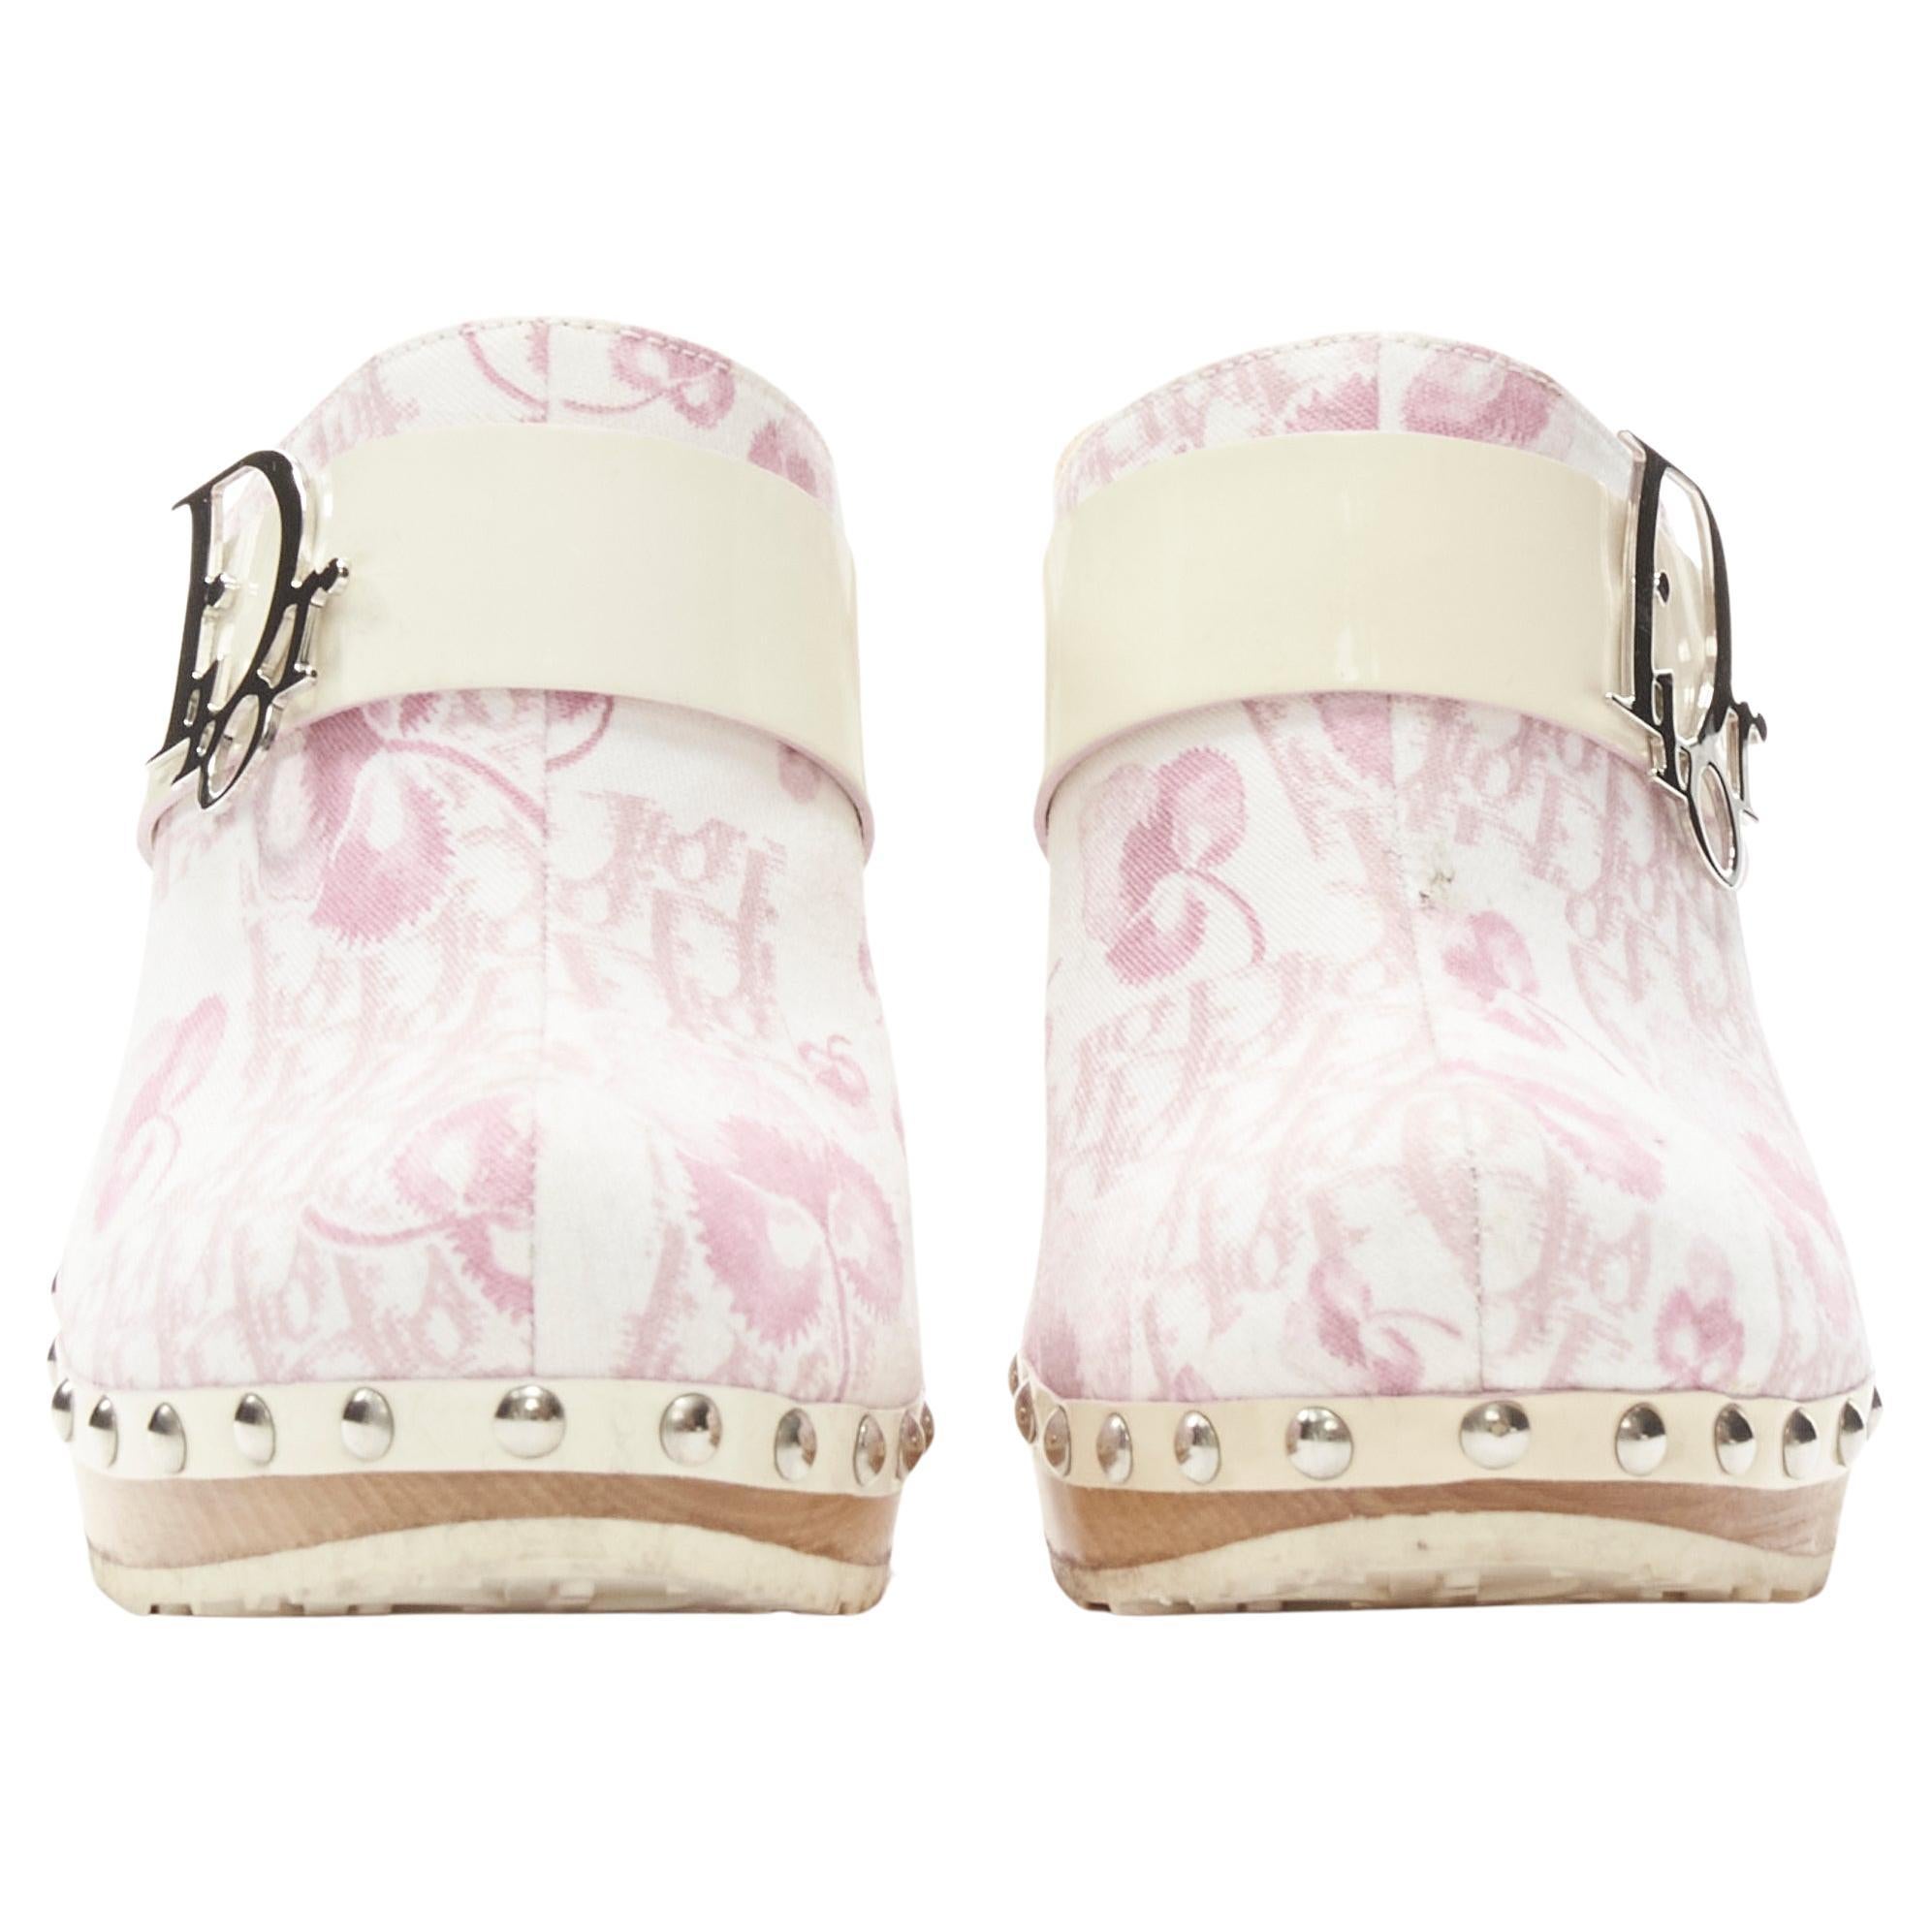 CHRISTIAN DIOR Vintage Y2K pink Trotteur Blossom monogram wooden clog EU36
Brand: Christian Dior
Designer: John Galliano
Material: Fabric
Color: Pink
Pattern: Floral
Extra Detail: Silver-tone DIOR charm on patent strap. Silver-tone stud. Wooden